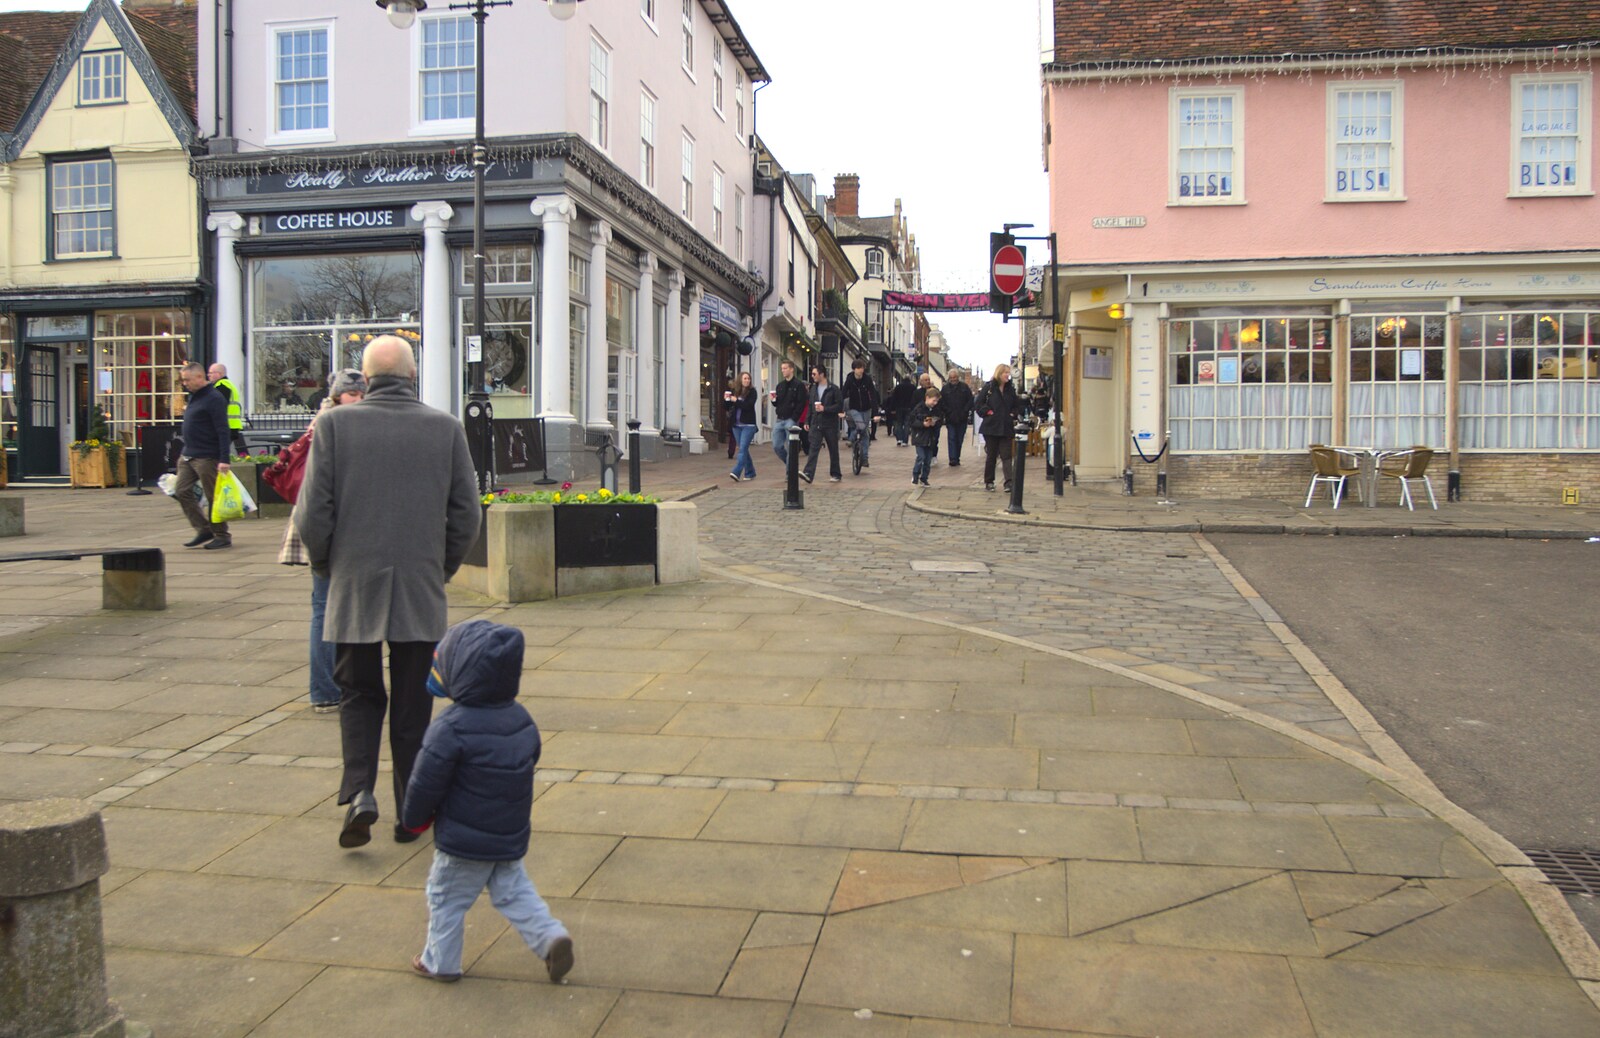 Grandad roams around on Angel Hill from Pizza Express with Grandad, Bury St. Edmunds, Suffolk - 29th December 2011